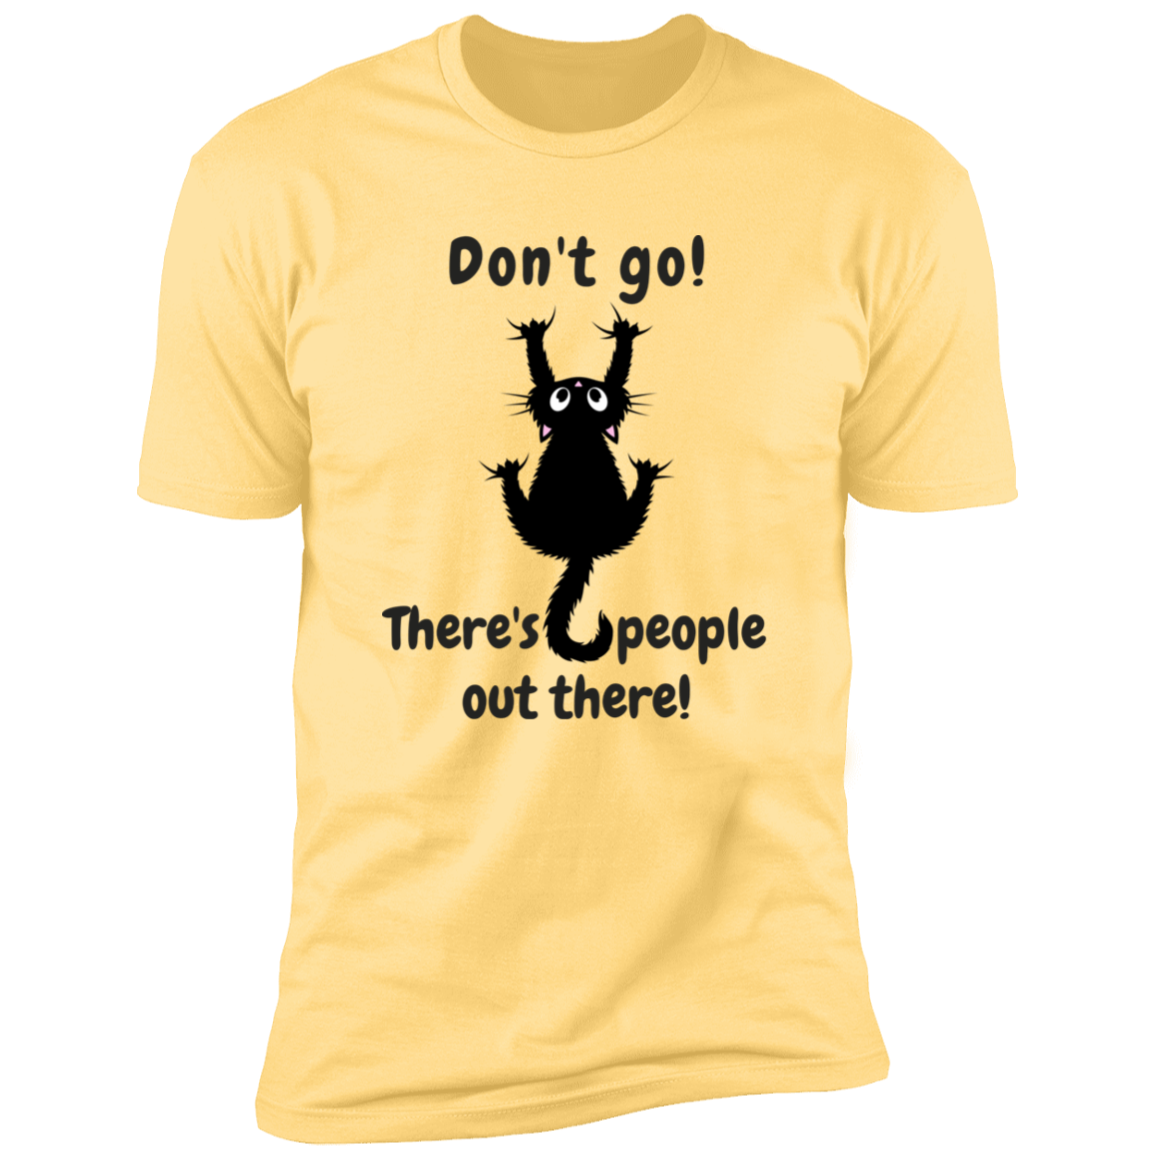 Don't Go! There are People Out there Shirt, funny cat shirt for humans, cat mom and cat dad shirt, in banana cream